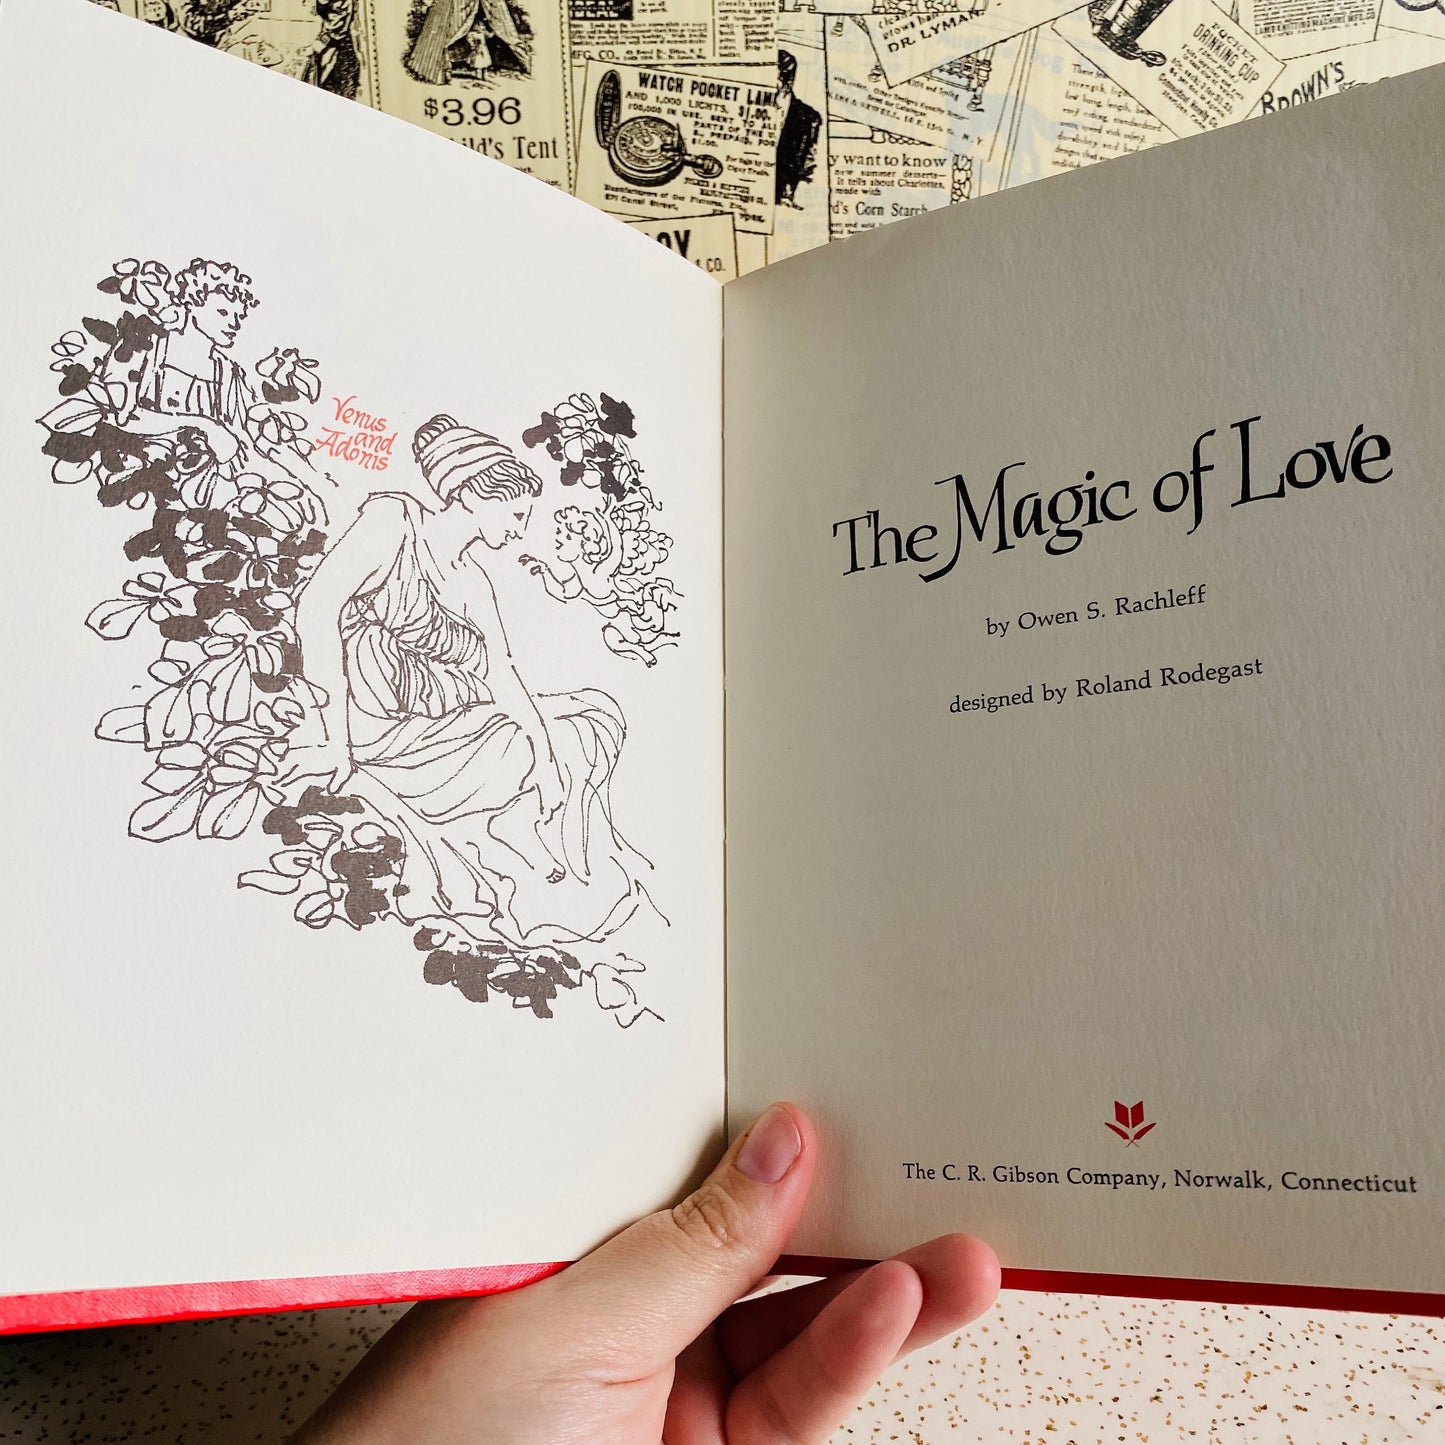 Vintage The Magic of Love book. 1974 love spell book full of love potions, recipes and lore. Retro occult and witchcraft collectible book.